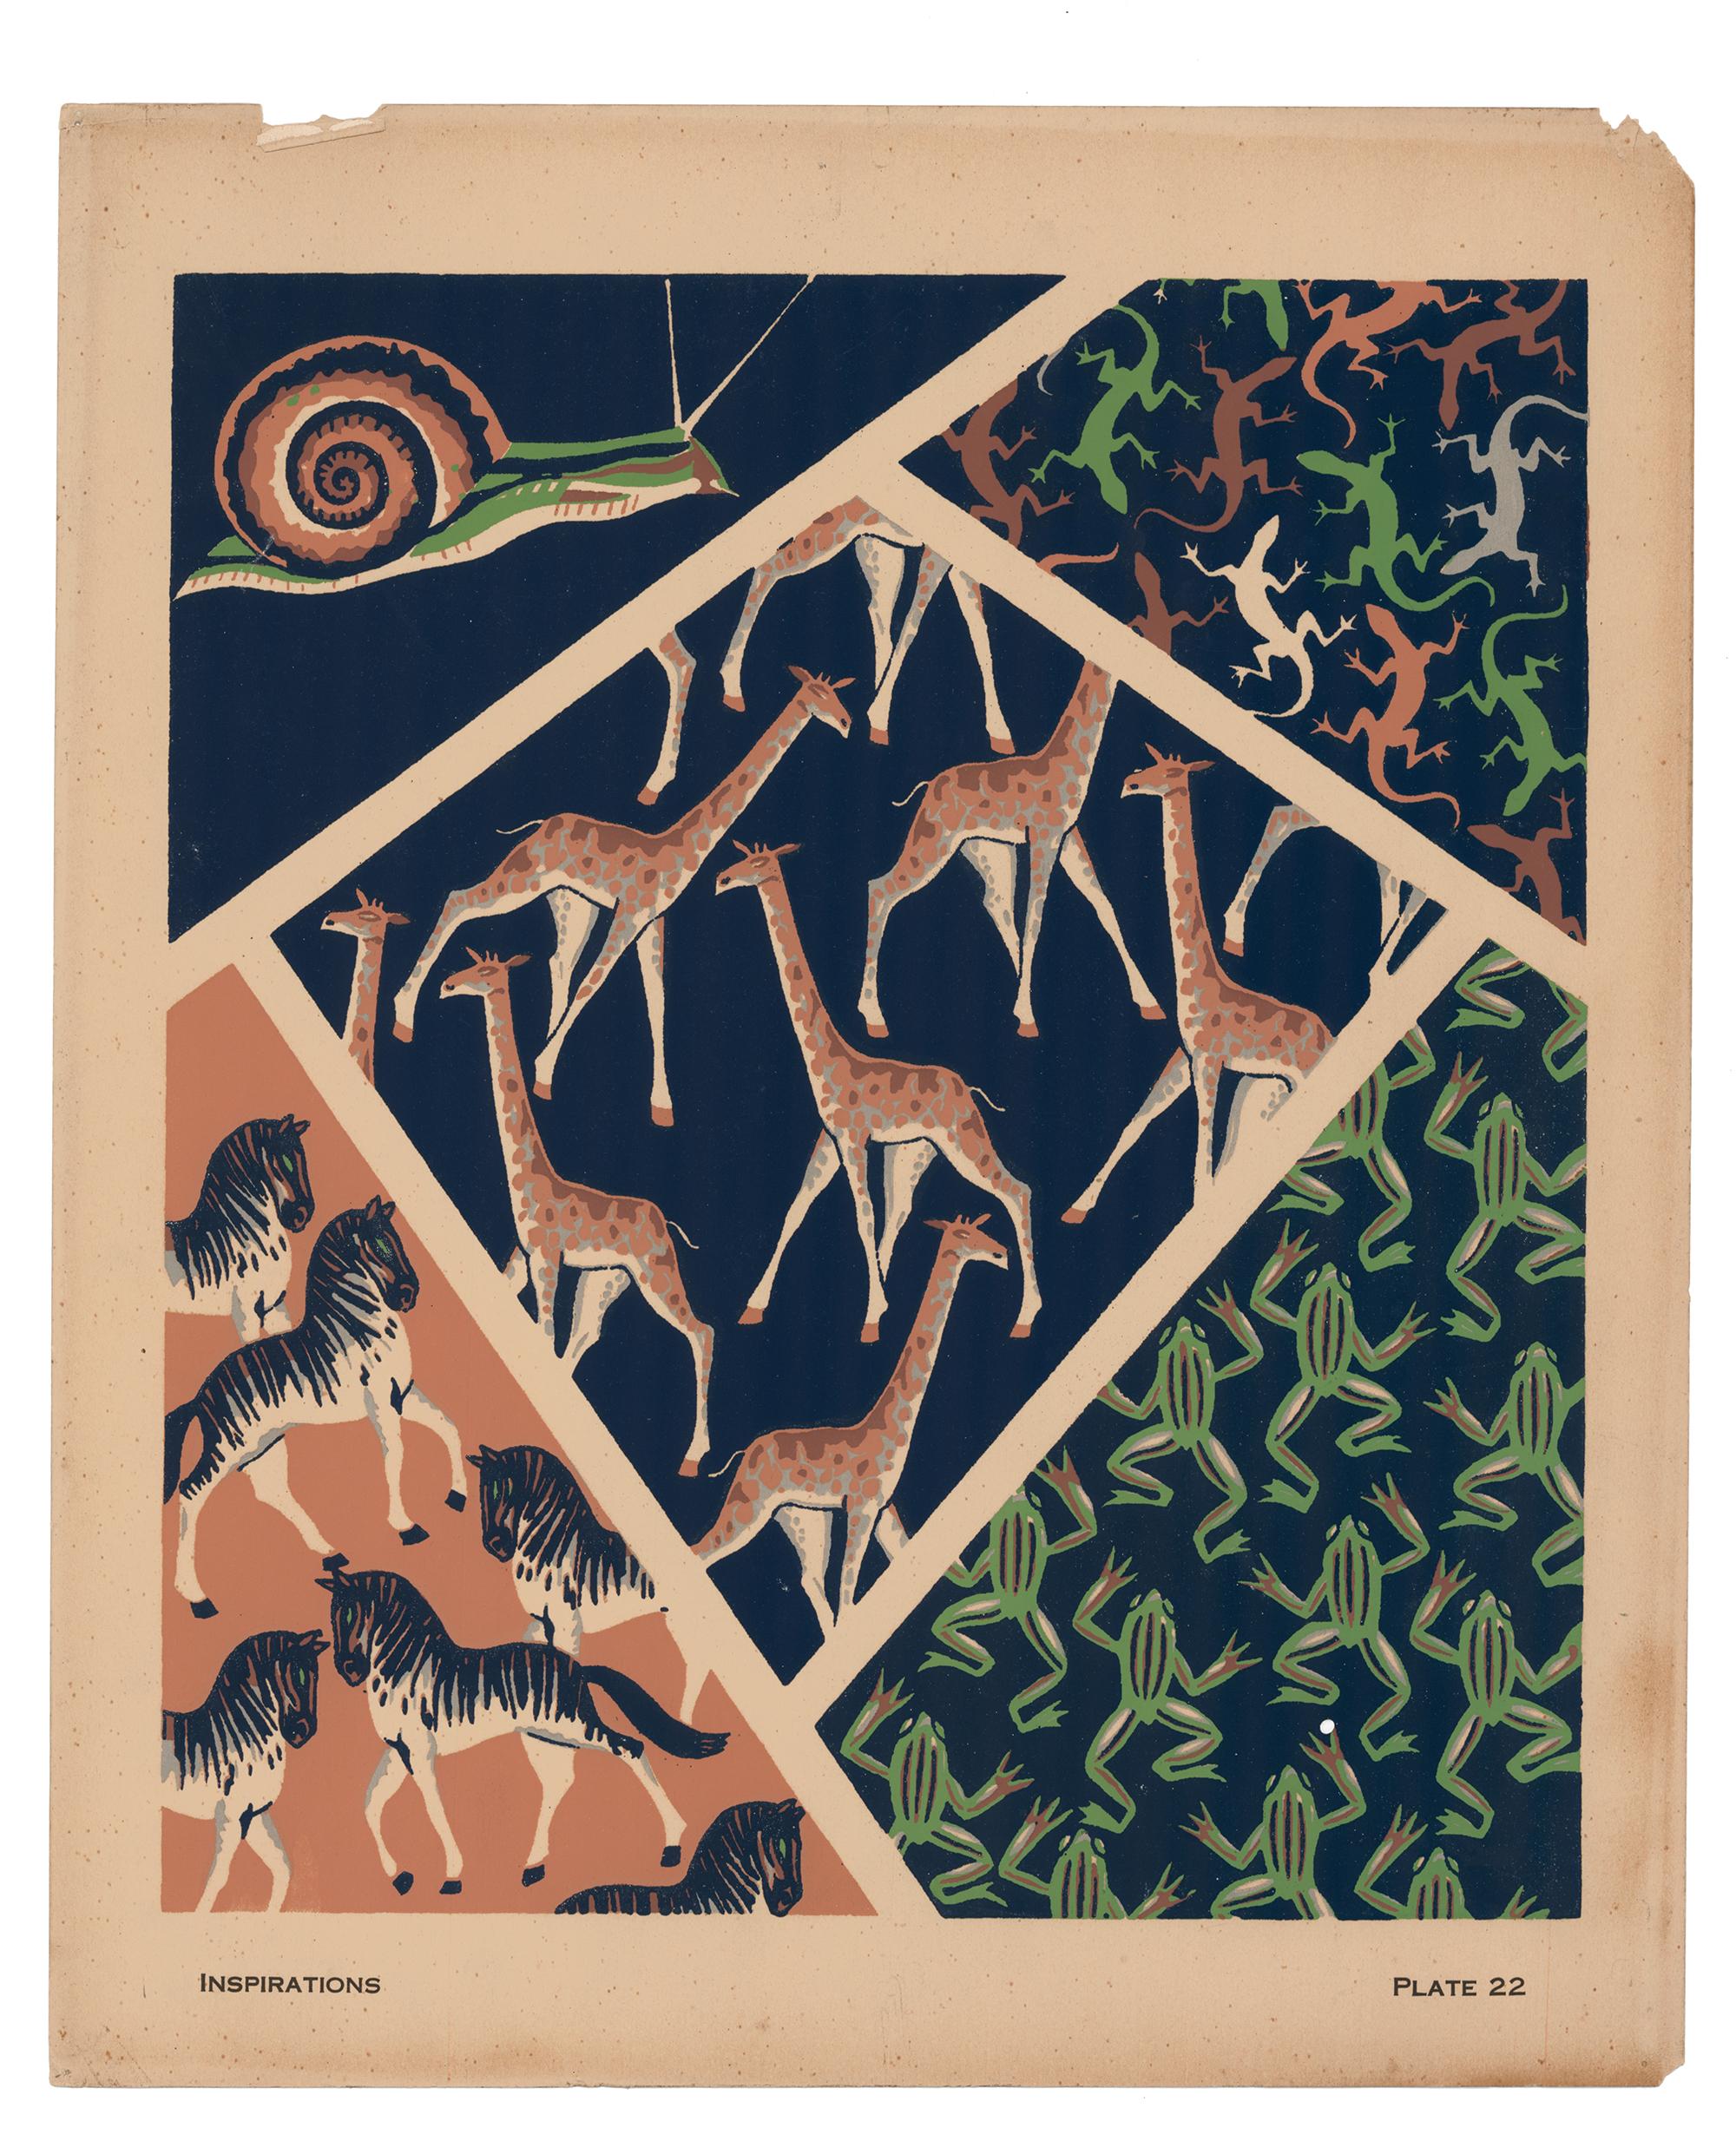 Giraffe Pochoir with Zebras and Frogs - Print by Andre Durenceau